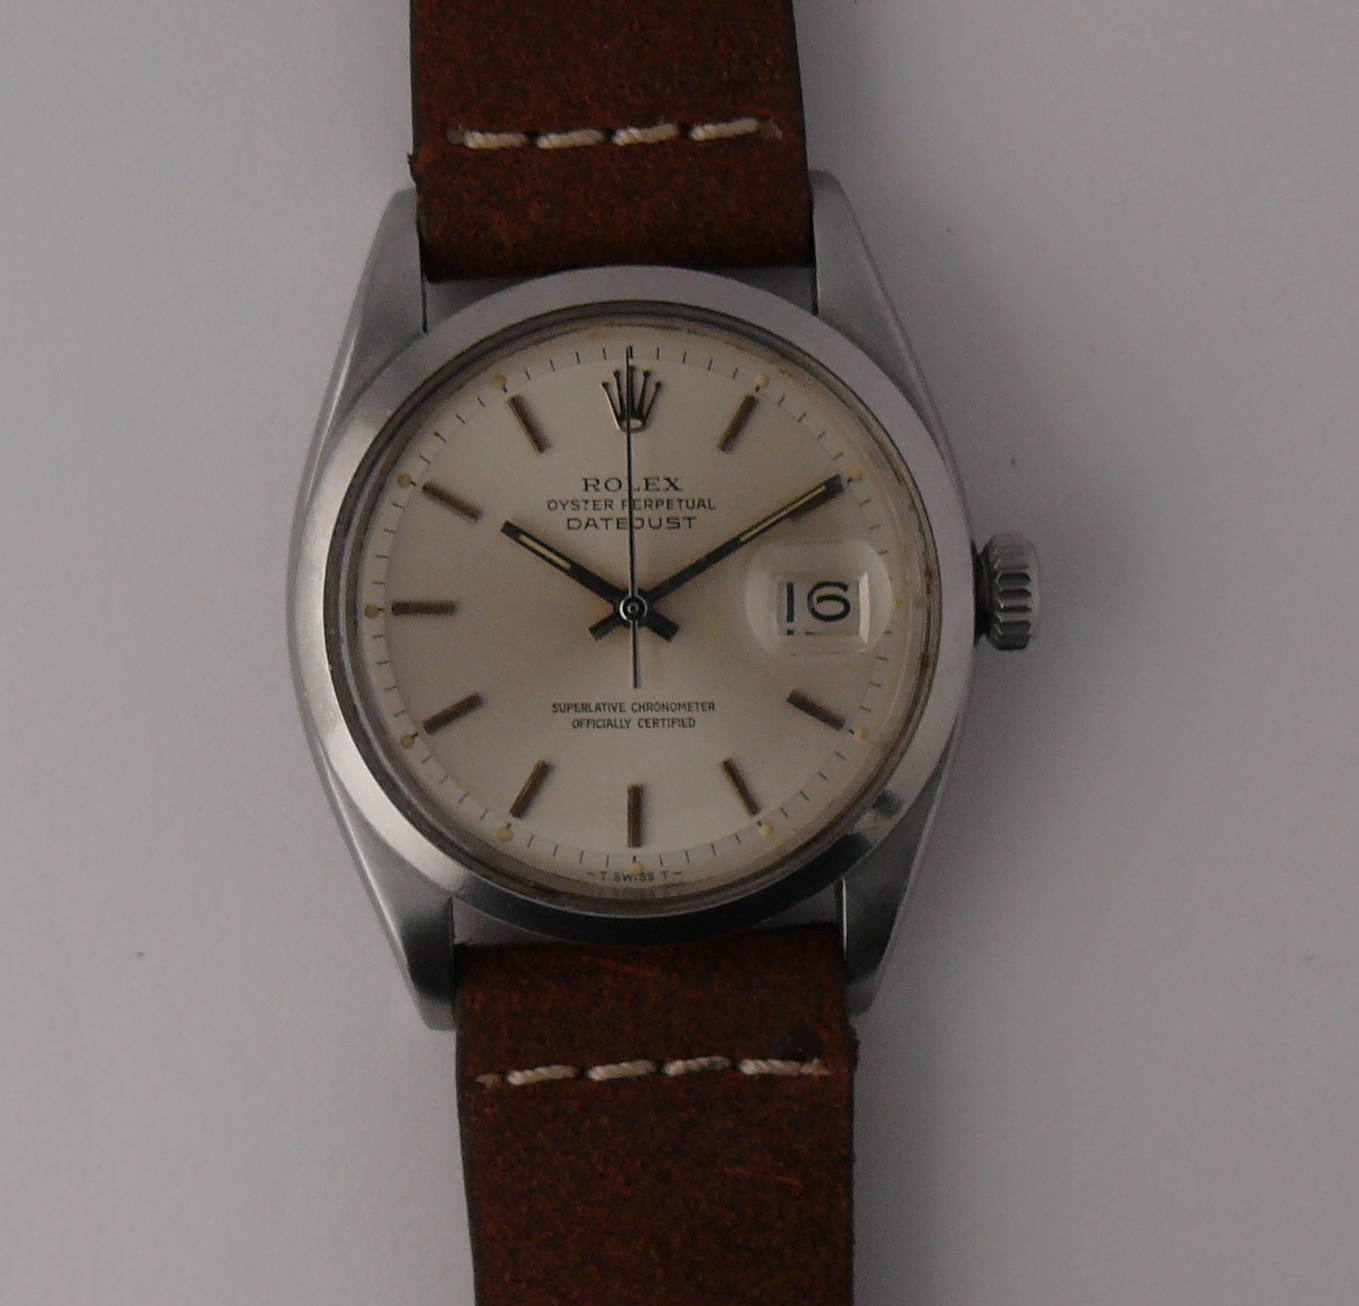 1958 Rolex Oyster Perpetual Datejust Ref 6605 6604, a vintage 1958 Rolex Oyster Perpetual Datejust